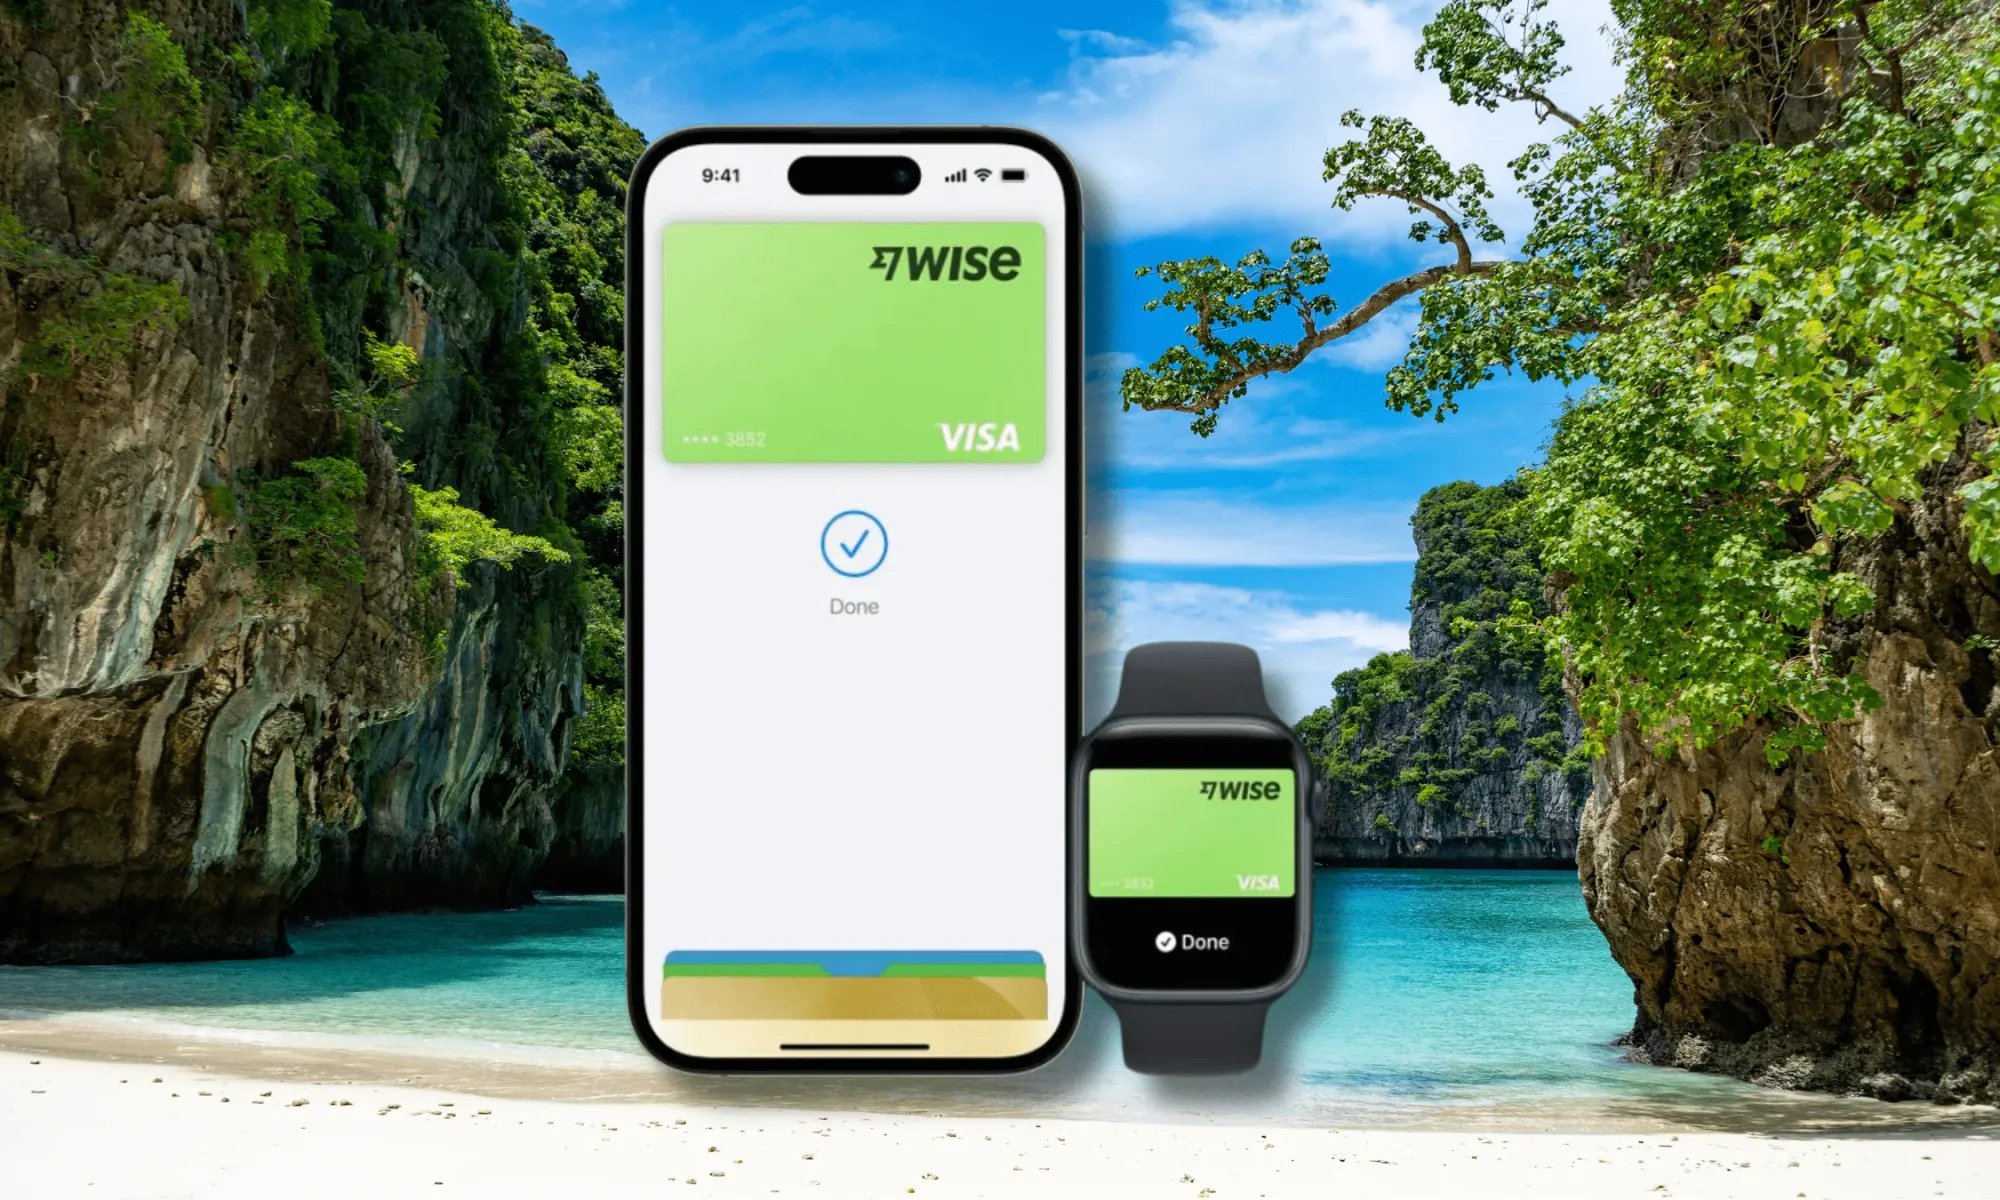 Wise travel debit card in Apple Wallet with Thailand in the background